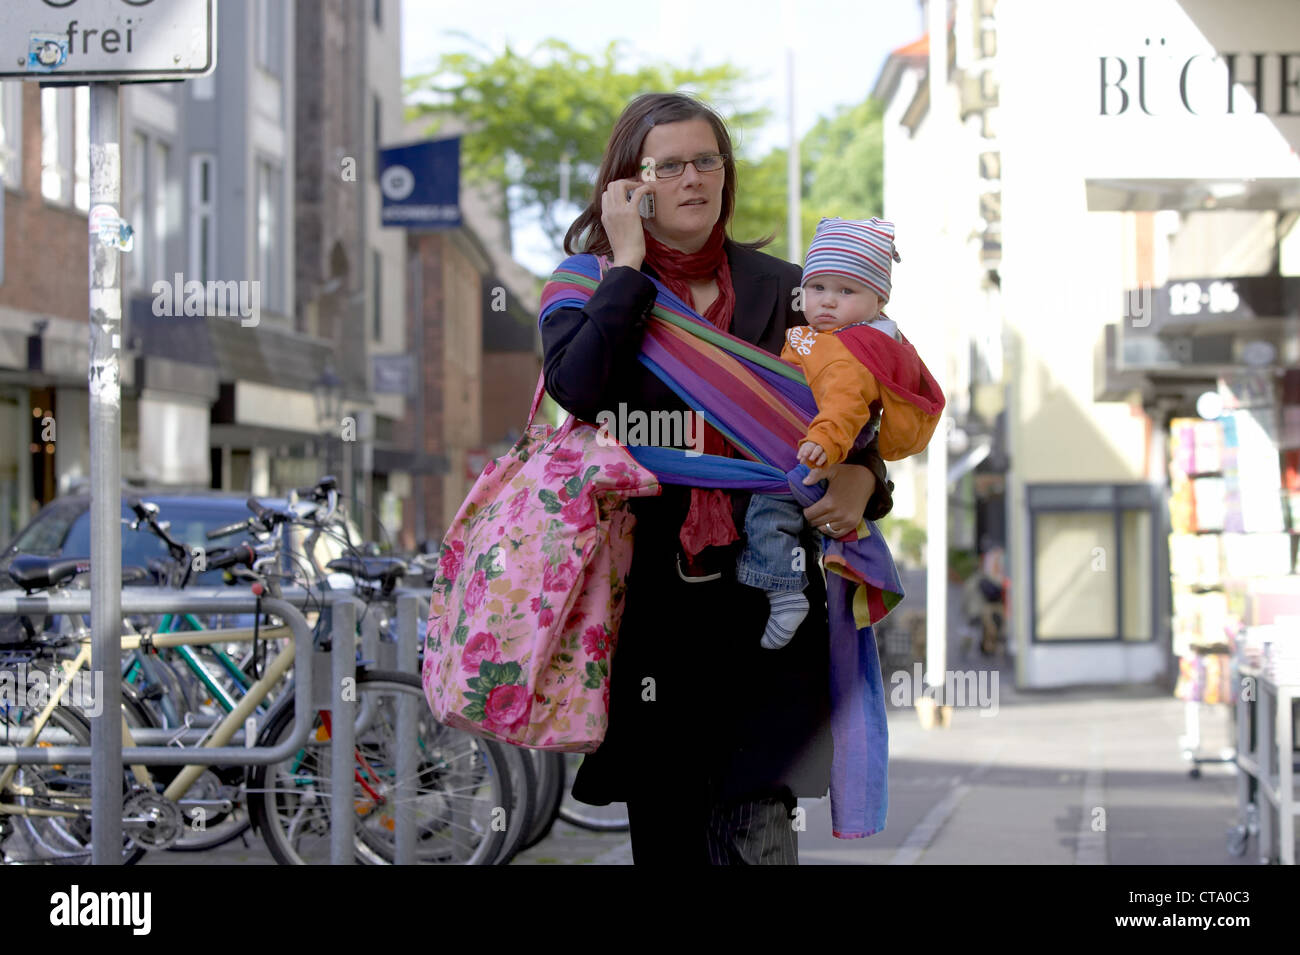 Berufstaetige mother with baby in the street Stock Photo